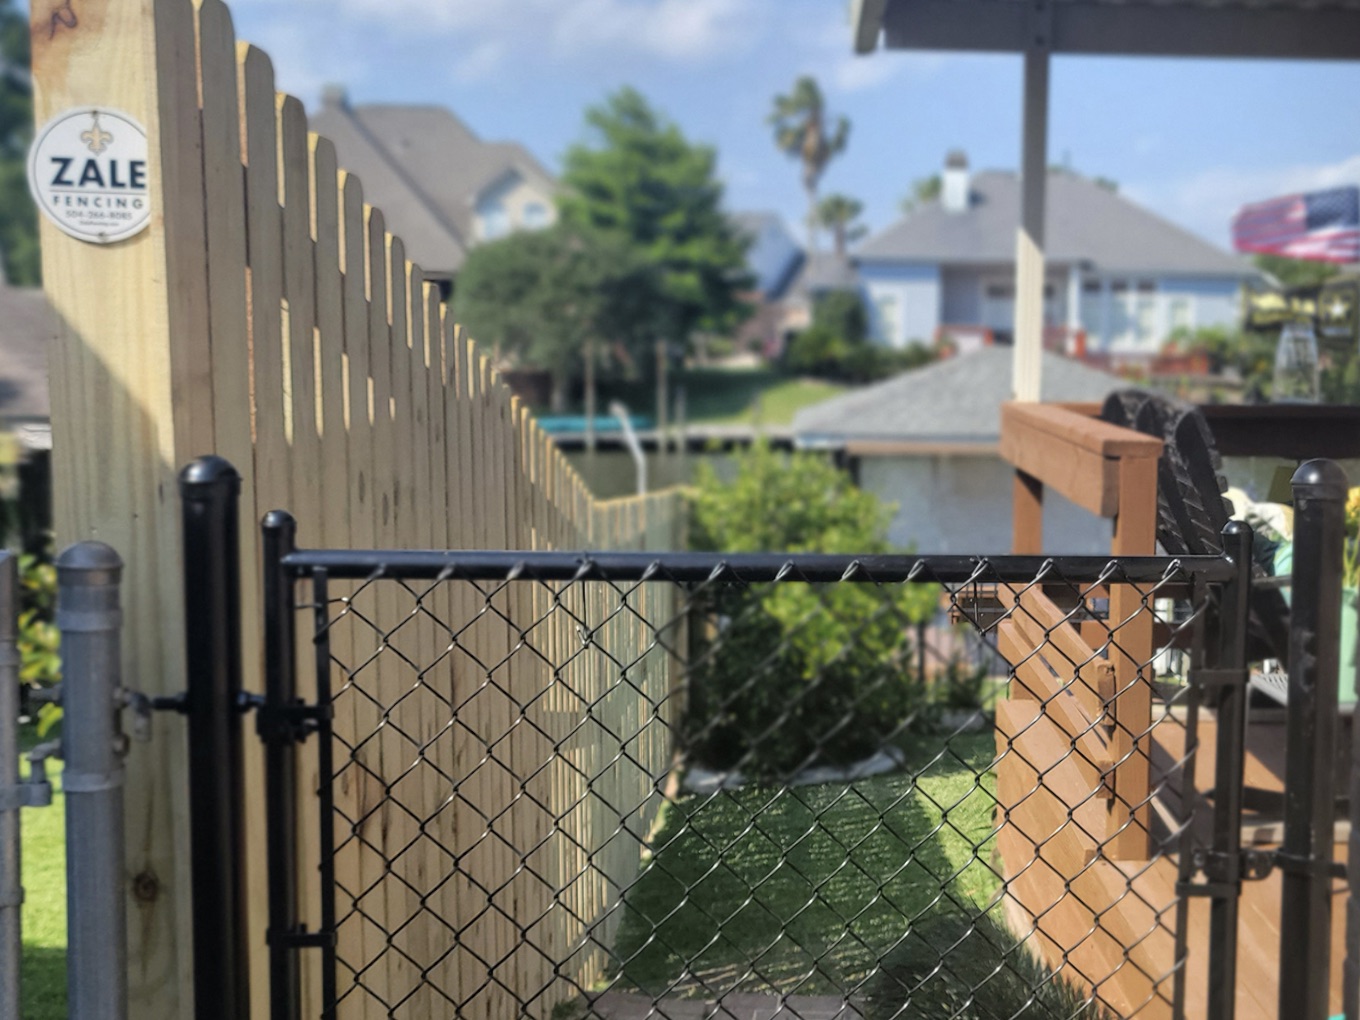 Photo of a Slidell residential fence